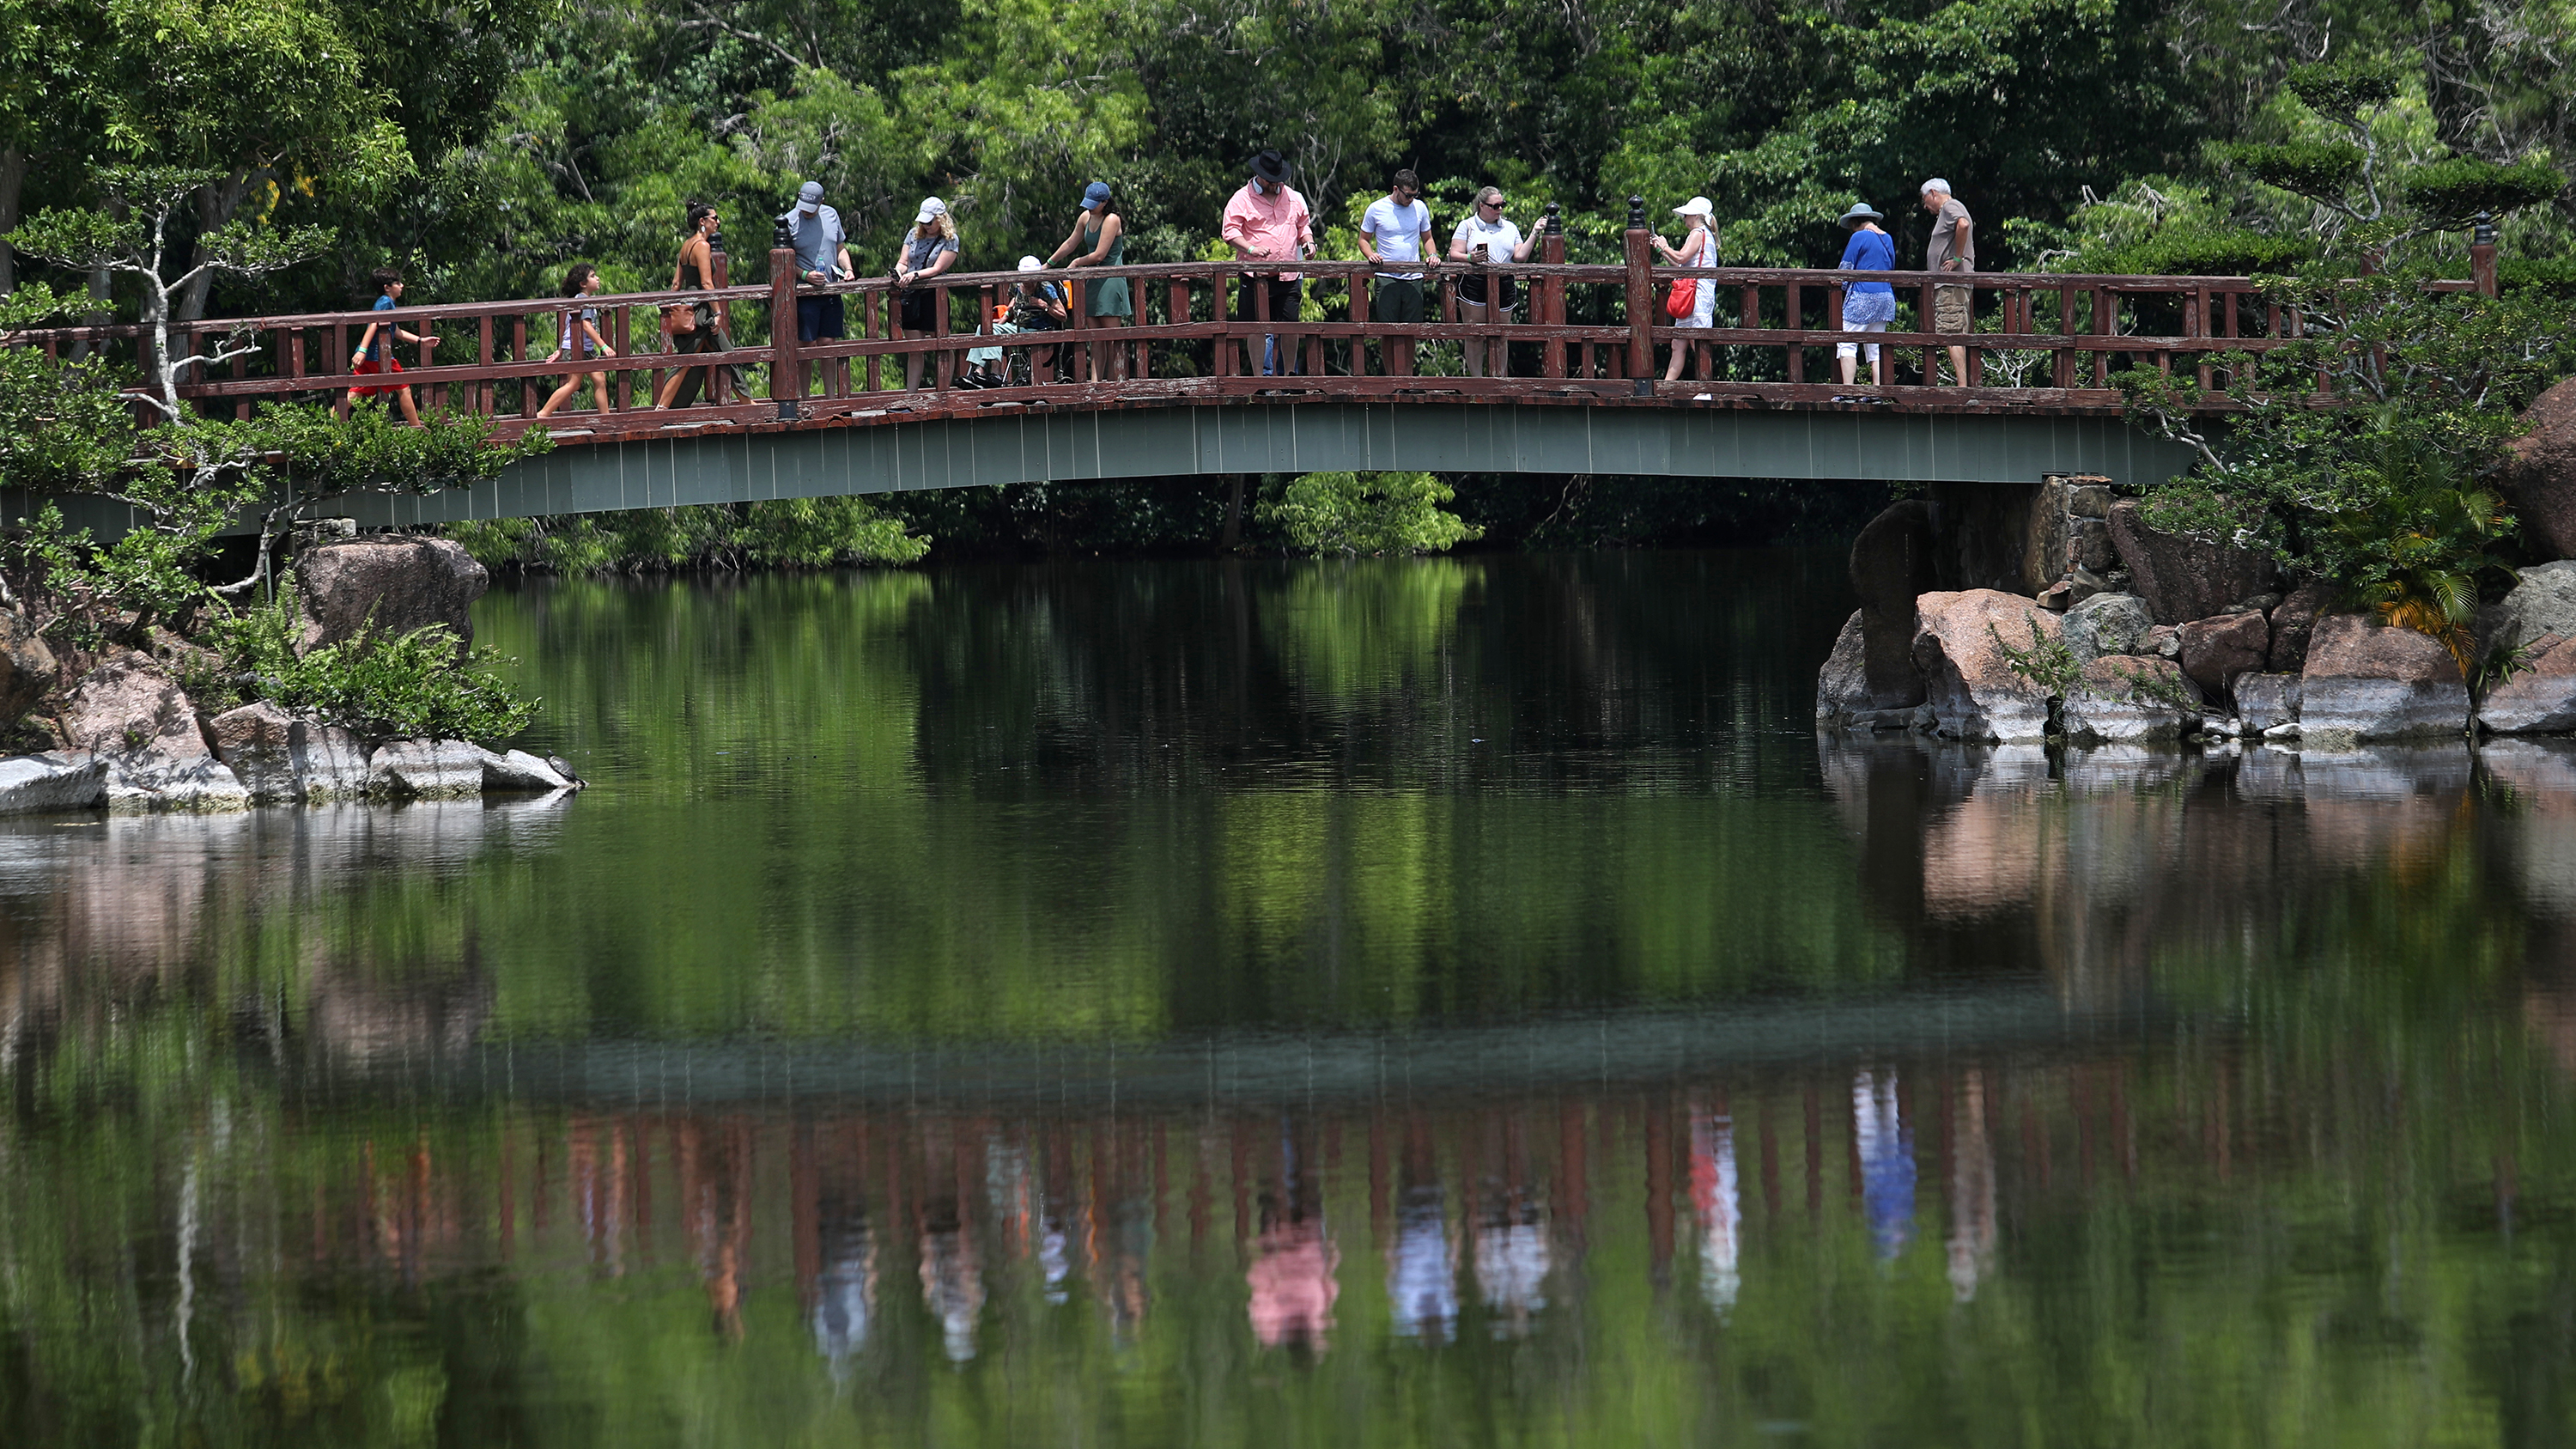 Visitors stroll on a bridge at the Morikami Museum and Japanese Gardens in Delray Beach, Florida.